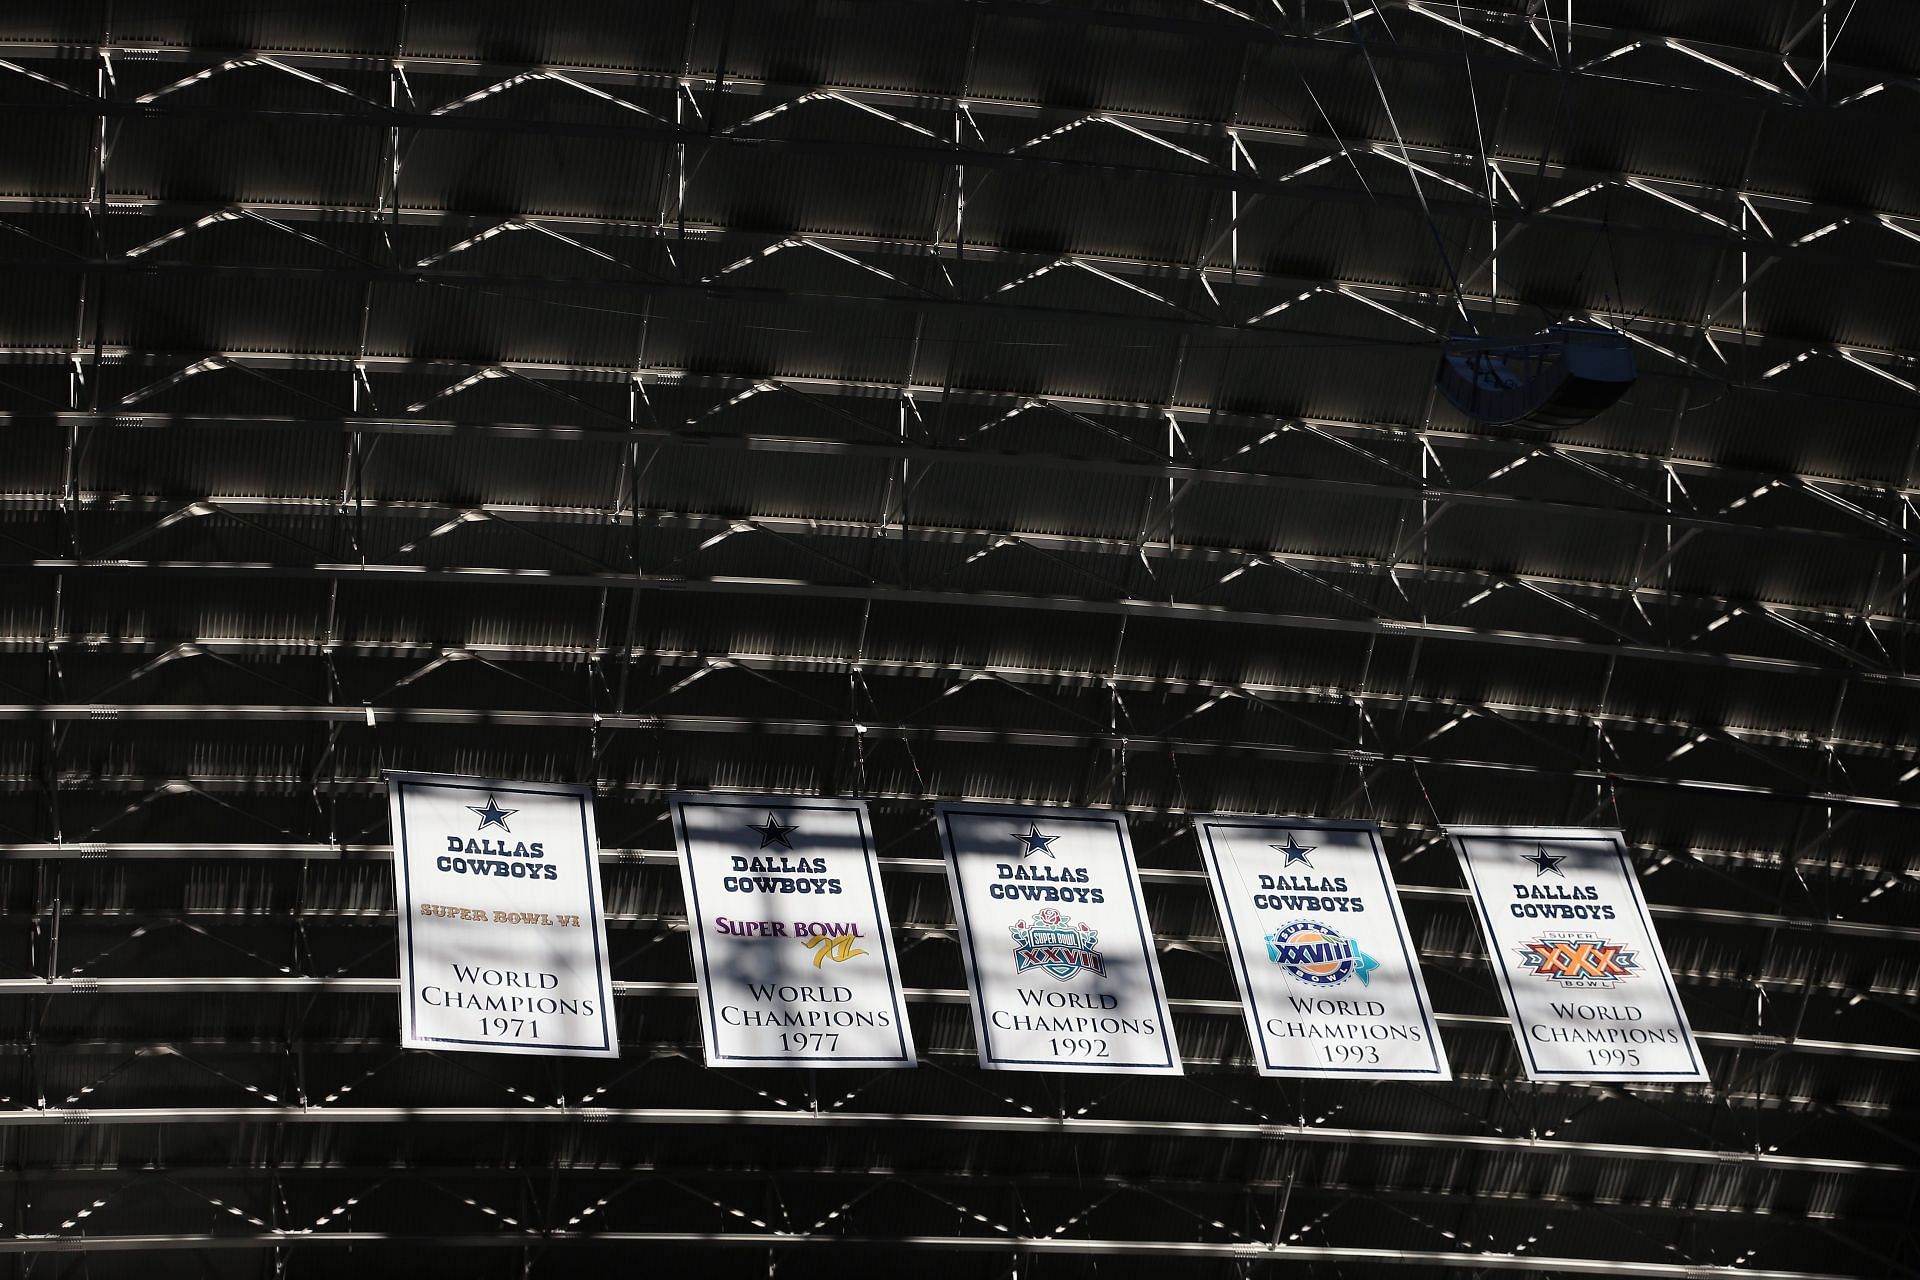 The Cowboys earned their first championship banner in 1971 (Photo: Getty)